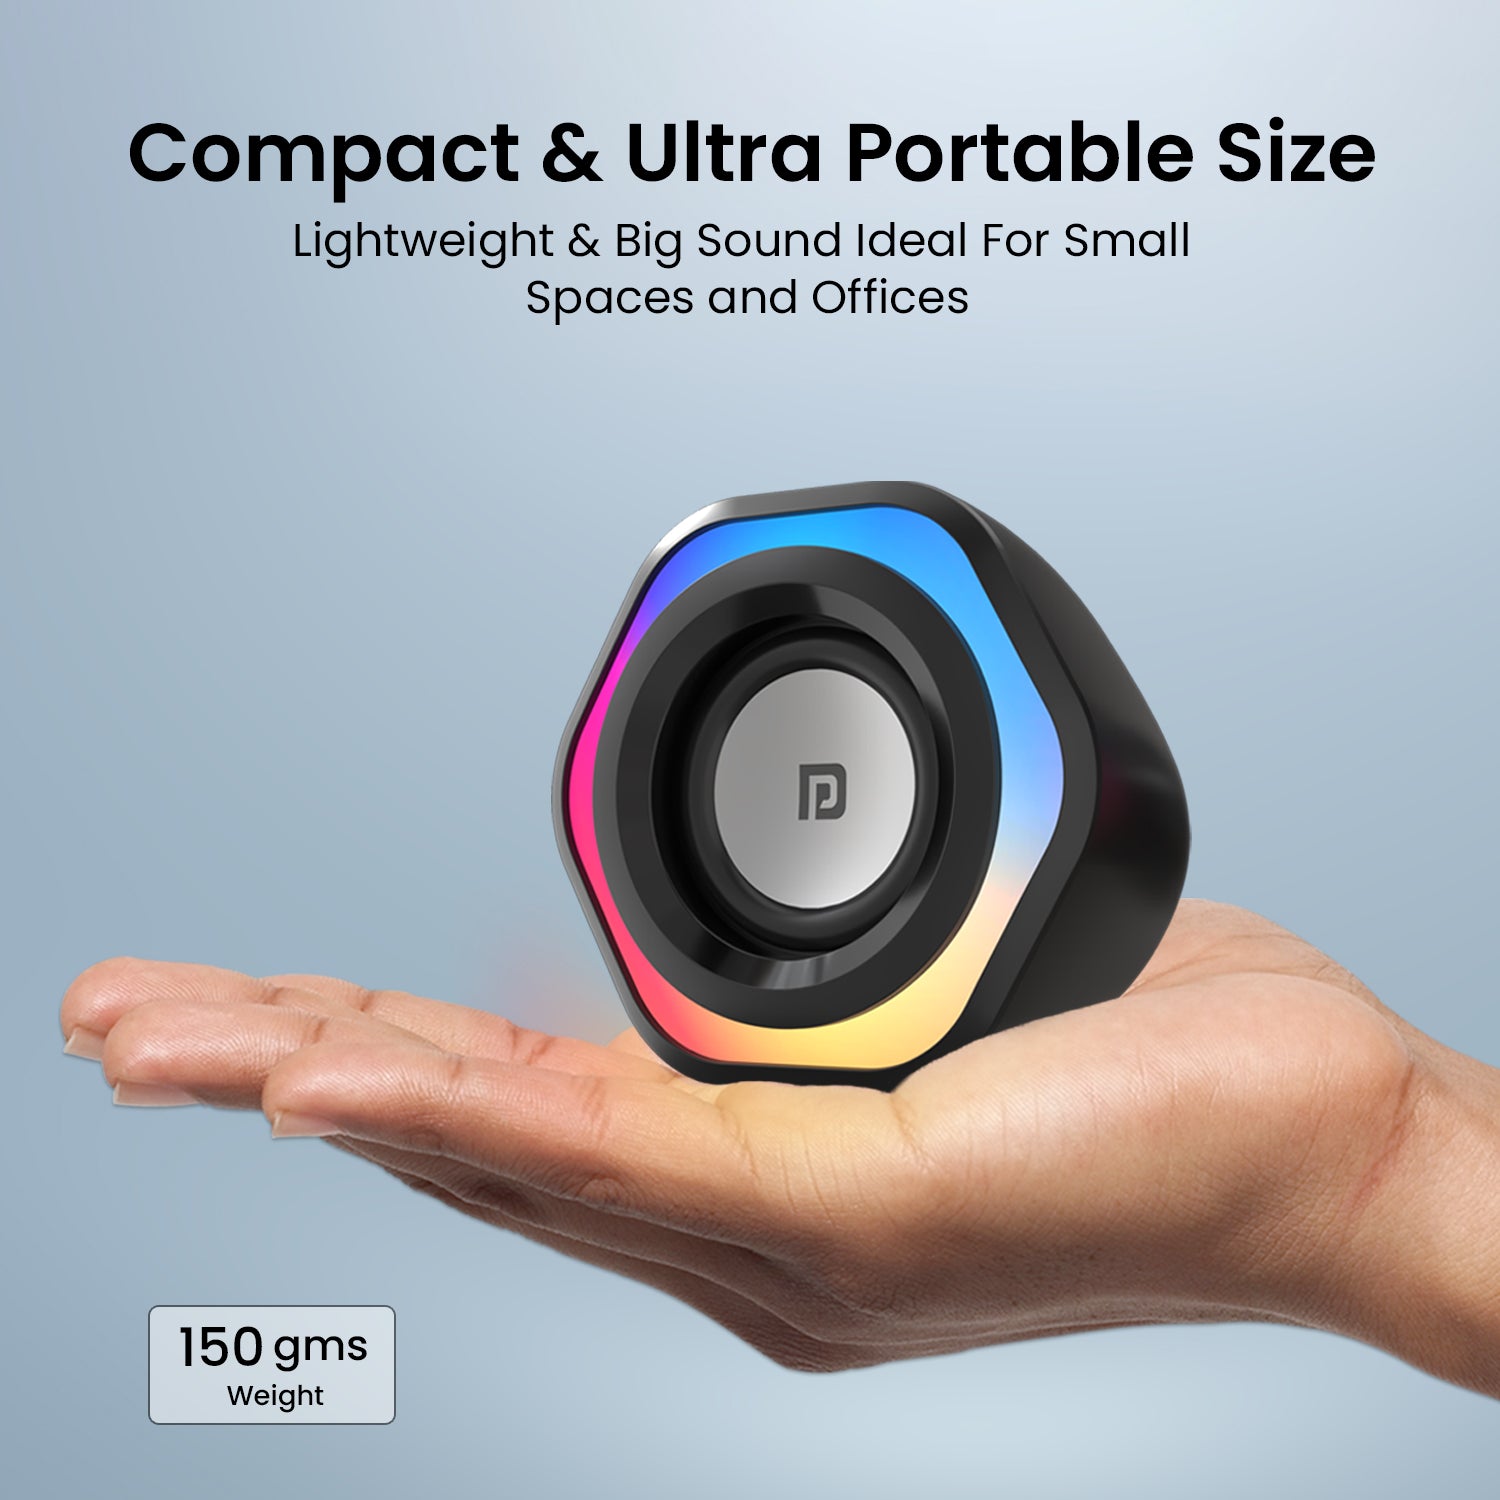 Black Portronics In Tune 4 6 watts usb speaker is compact and portable sizes